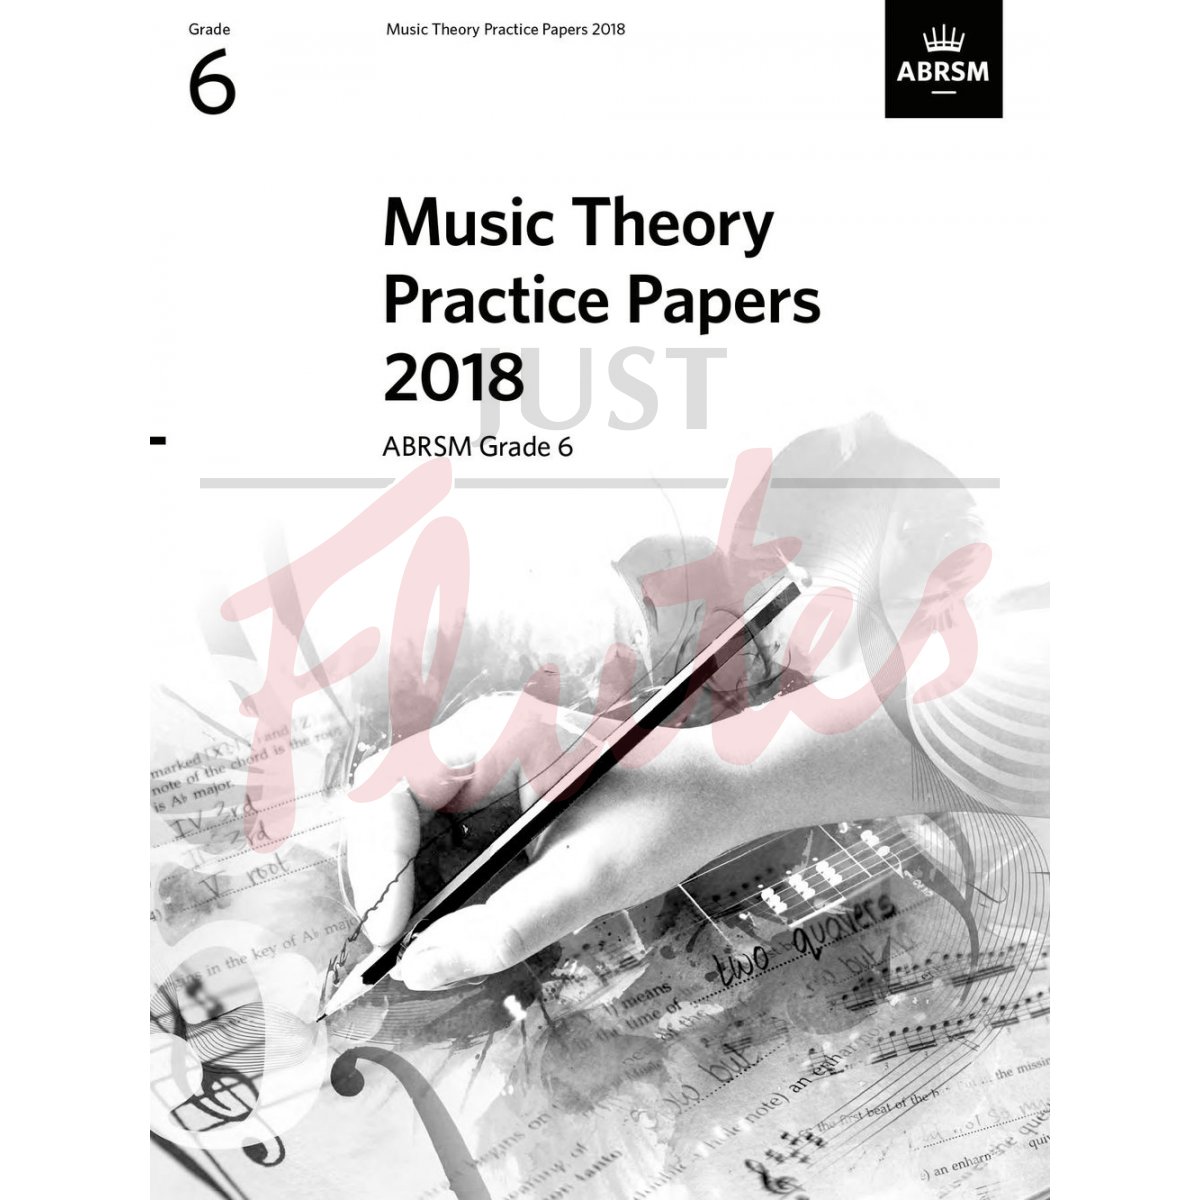 Music Theory Practice Papers 2018 Grade 6